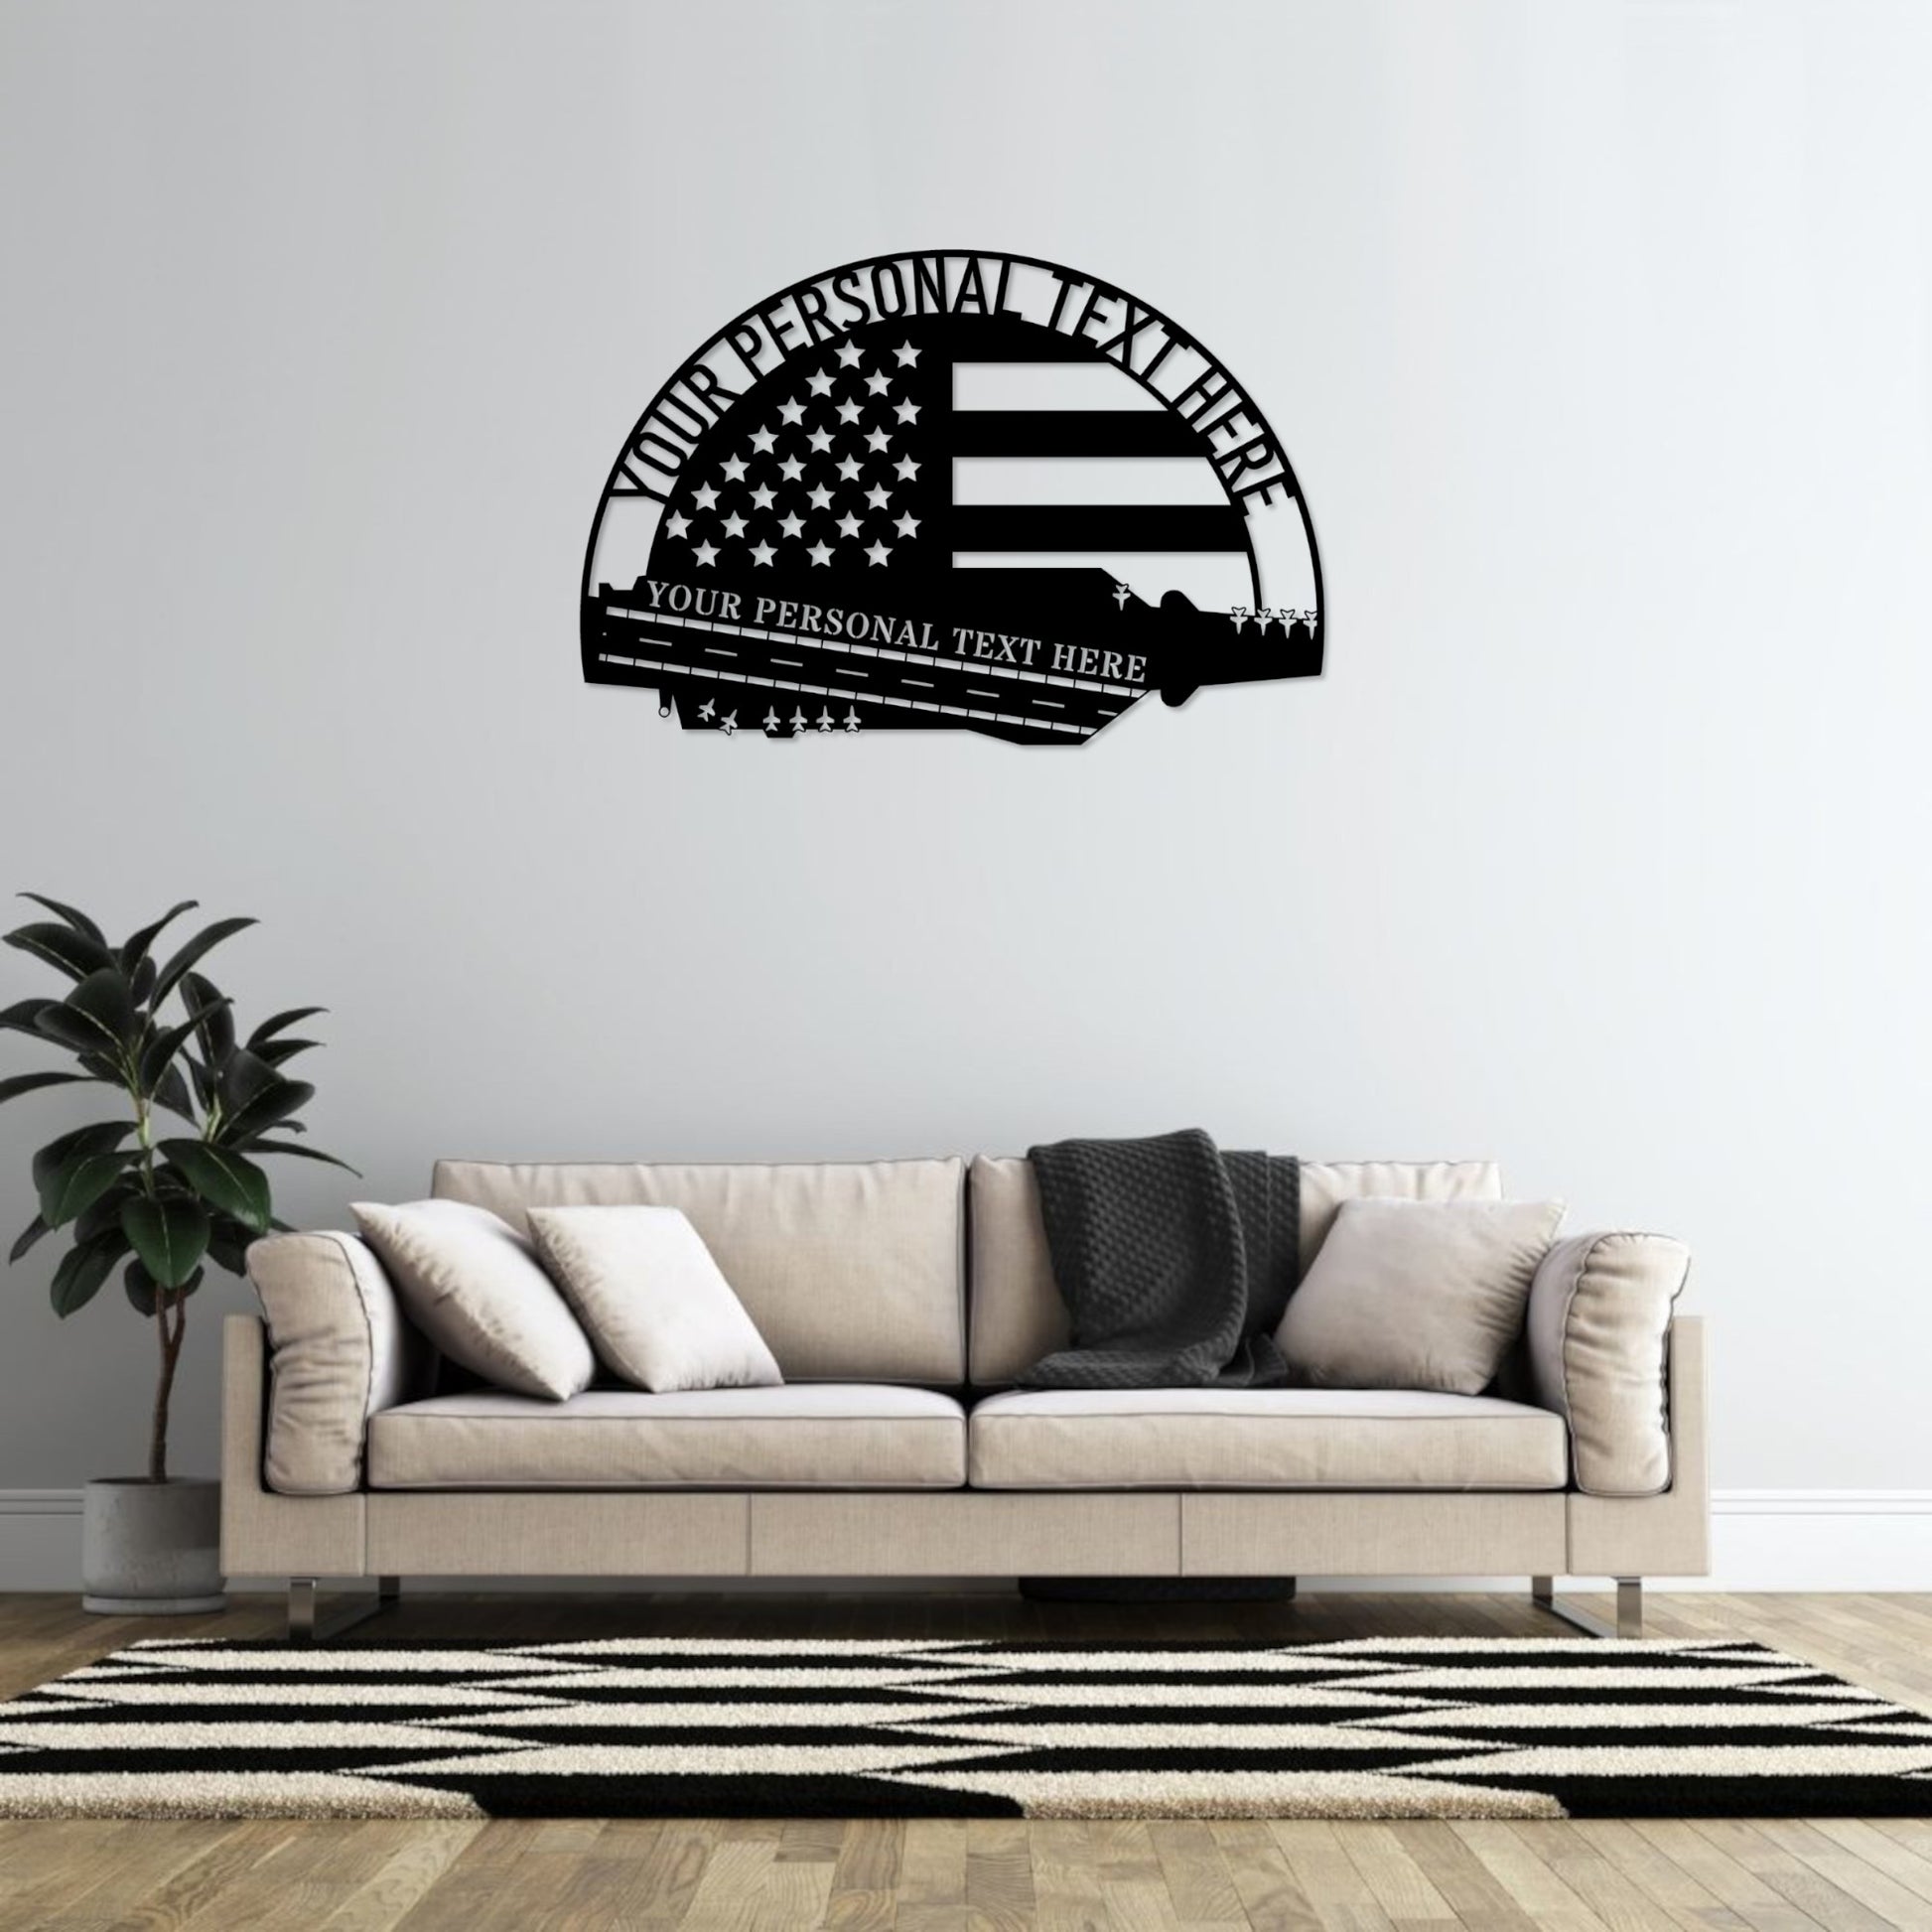 Personalized American Warship Metal Sign. Custom US Aircraft Carrier Wall Decor Gift. Navy Retirement. Military Wall Hanging. Army Sign Gift